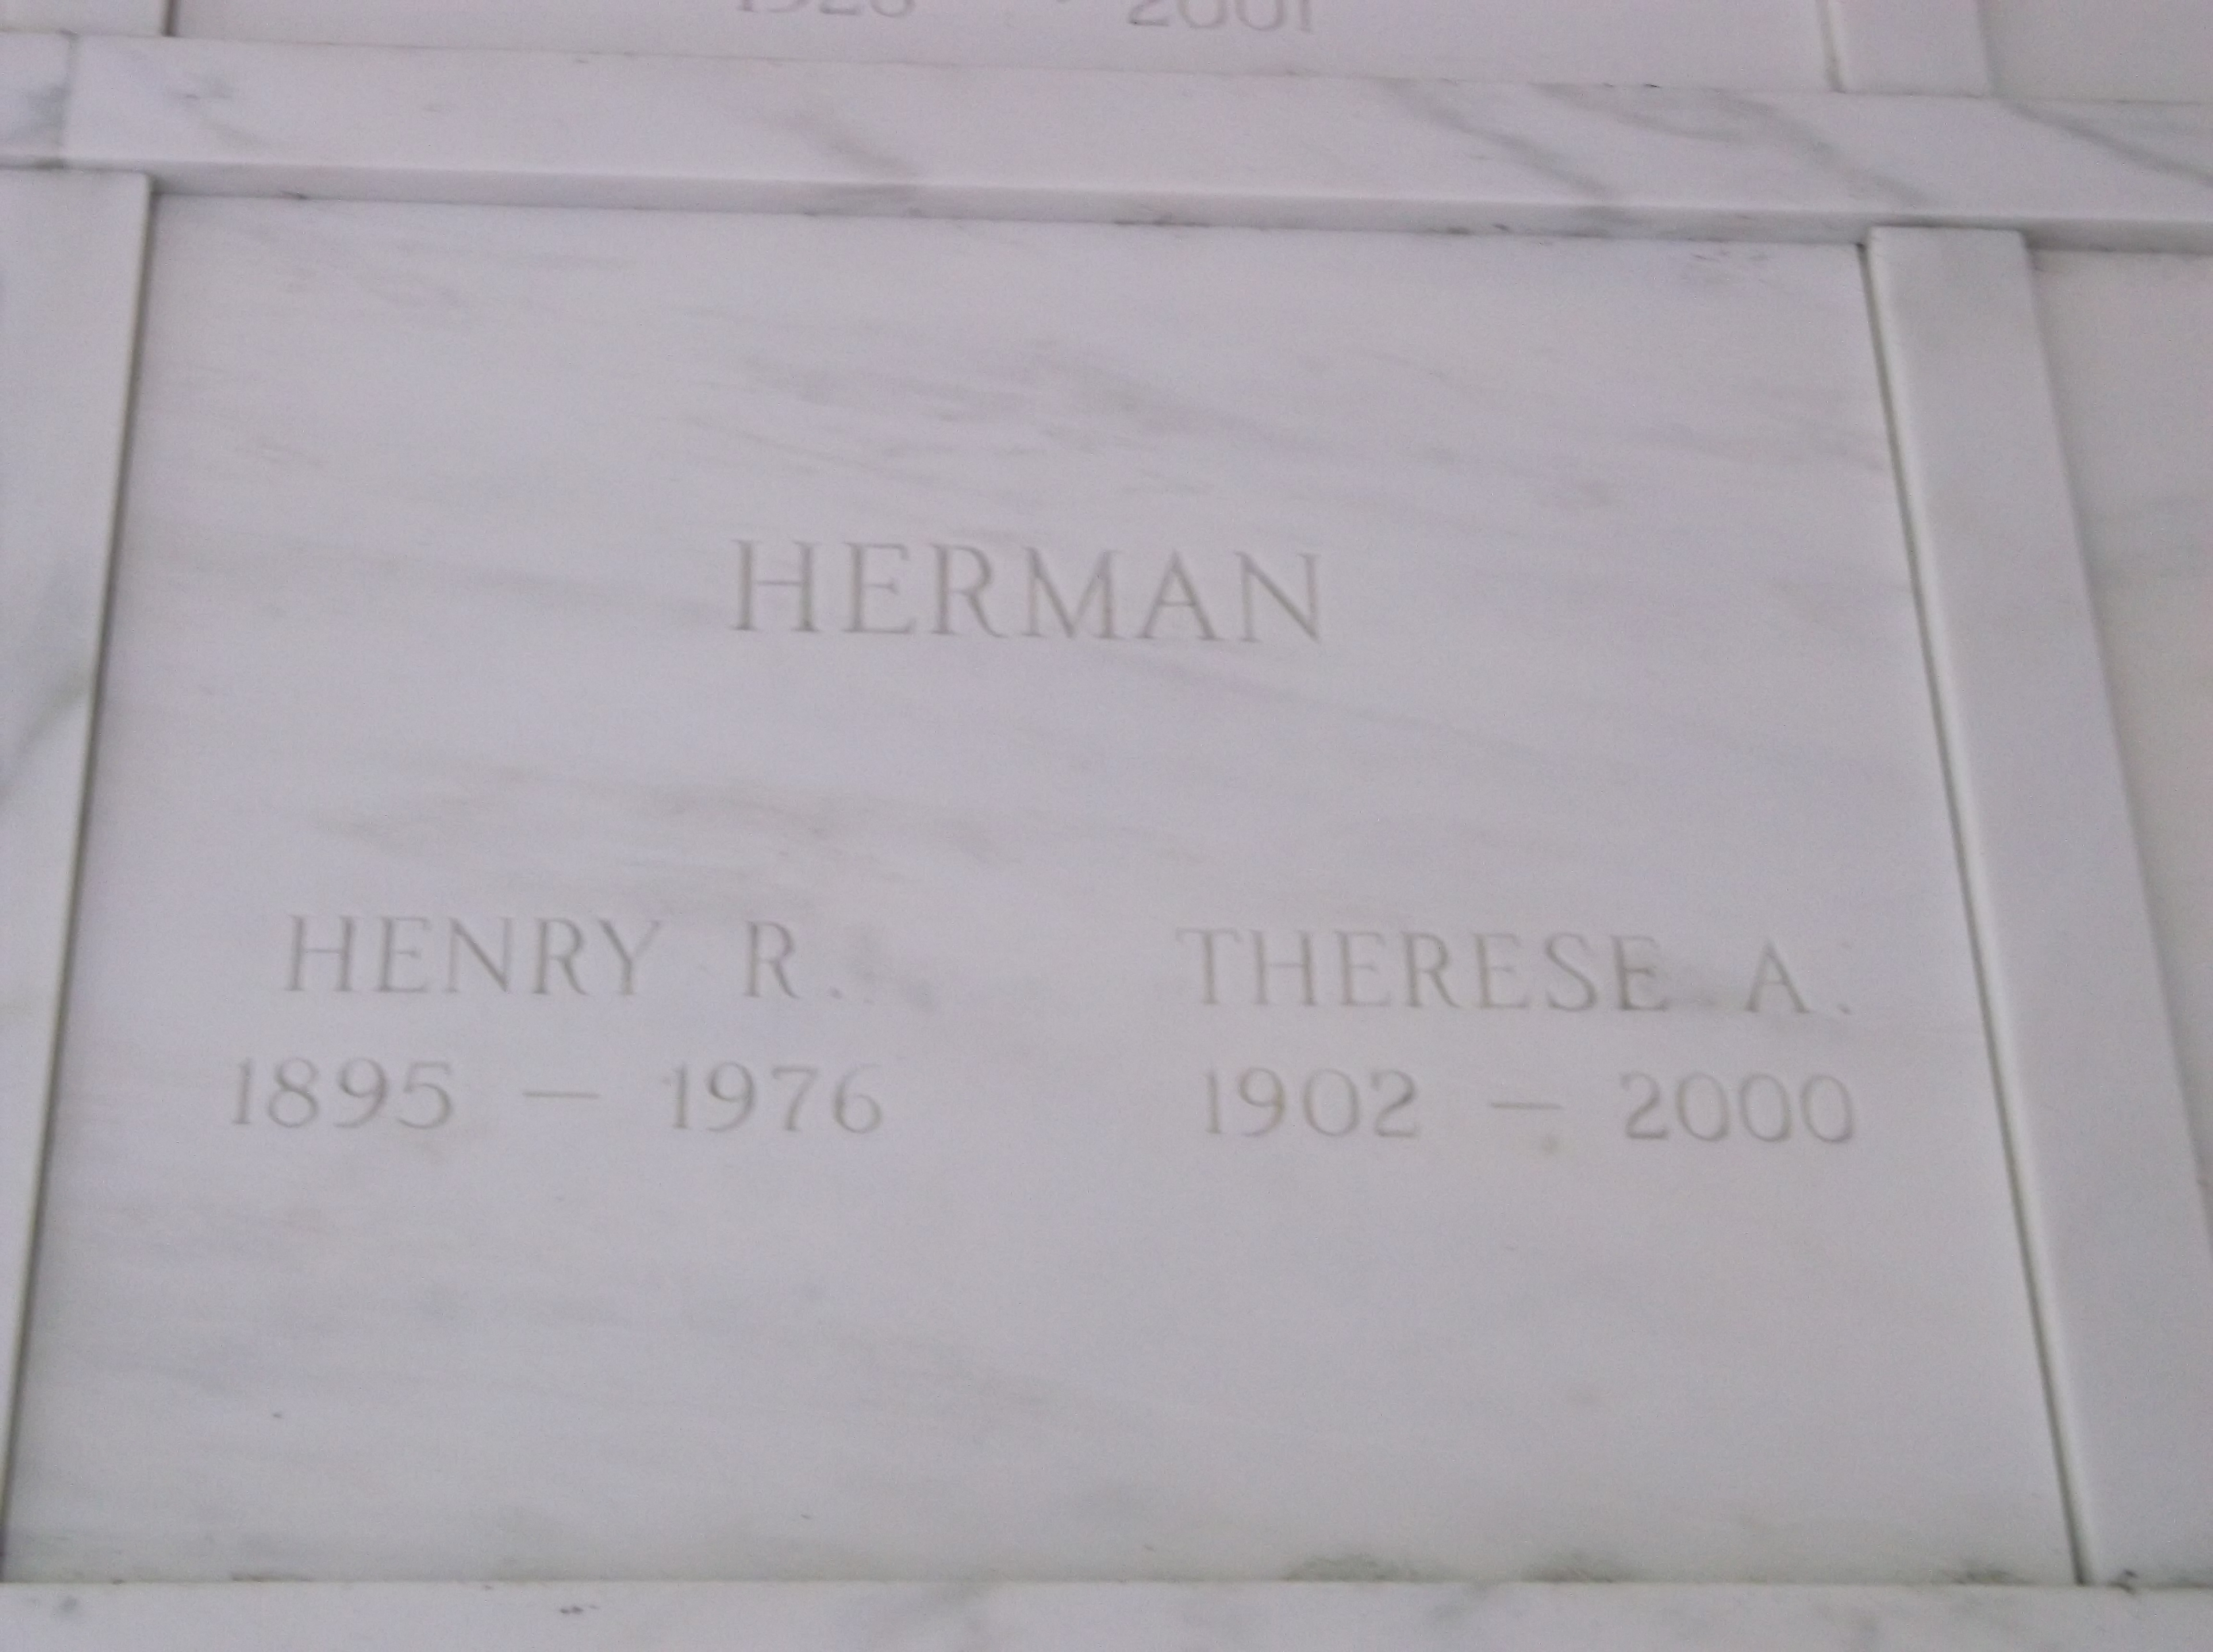 Therese A Herman